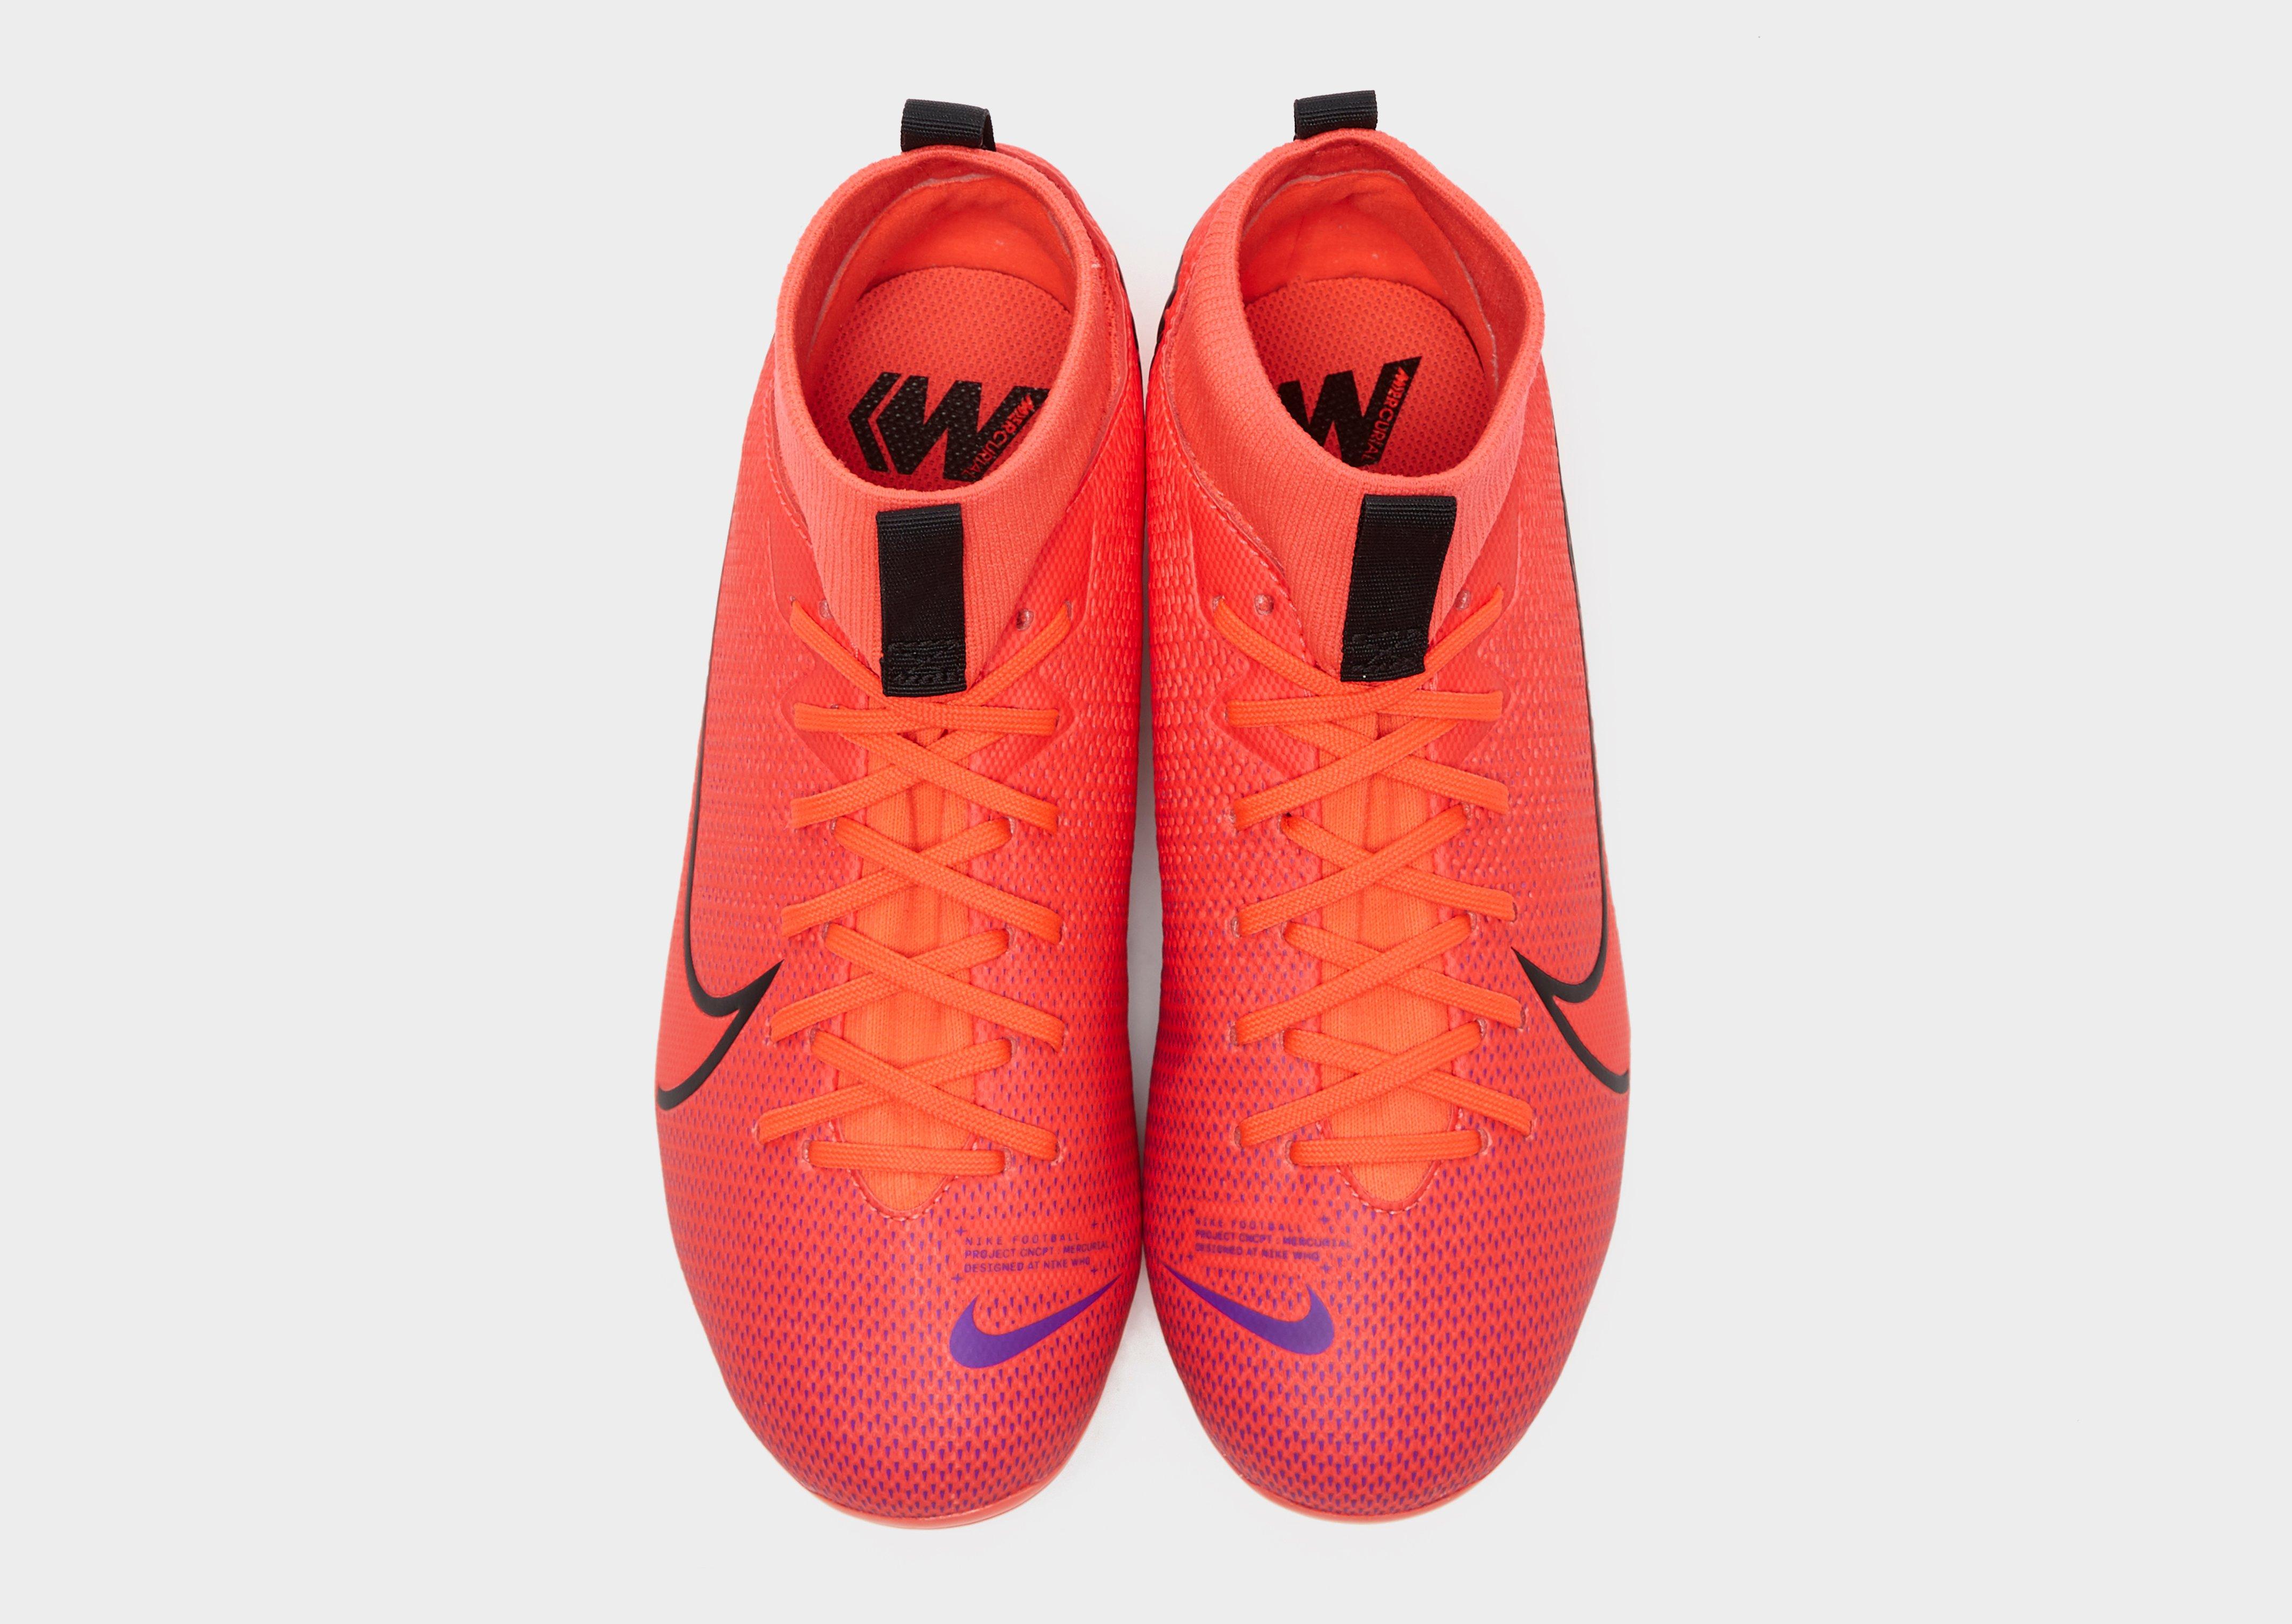 Nike Mercurial Superfly 7 Academy FG Soccer Cleats.